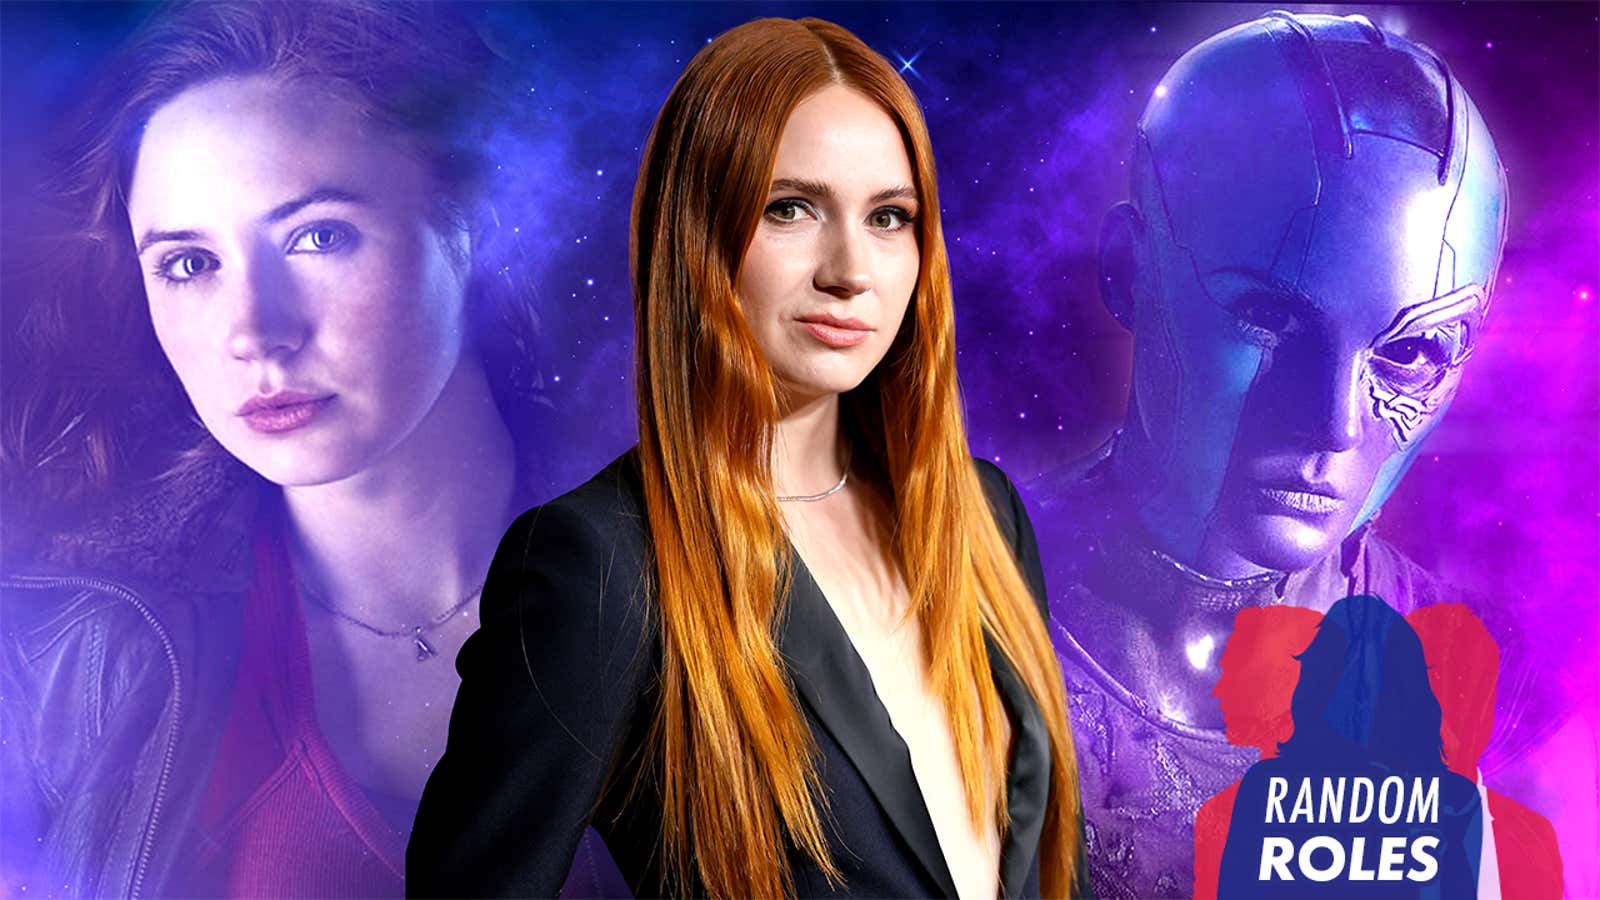 From left : Karen Gillan as Amy Pond in Doctor Who (BBC), at the Guardians Of The Galaxy Vol. 3 premiere, (Jesse Grant/Getty Images), as Nebula in Guardians Of The Galaxy Vol. 3 (Marvel Studios)